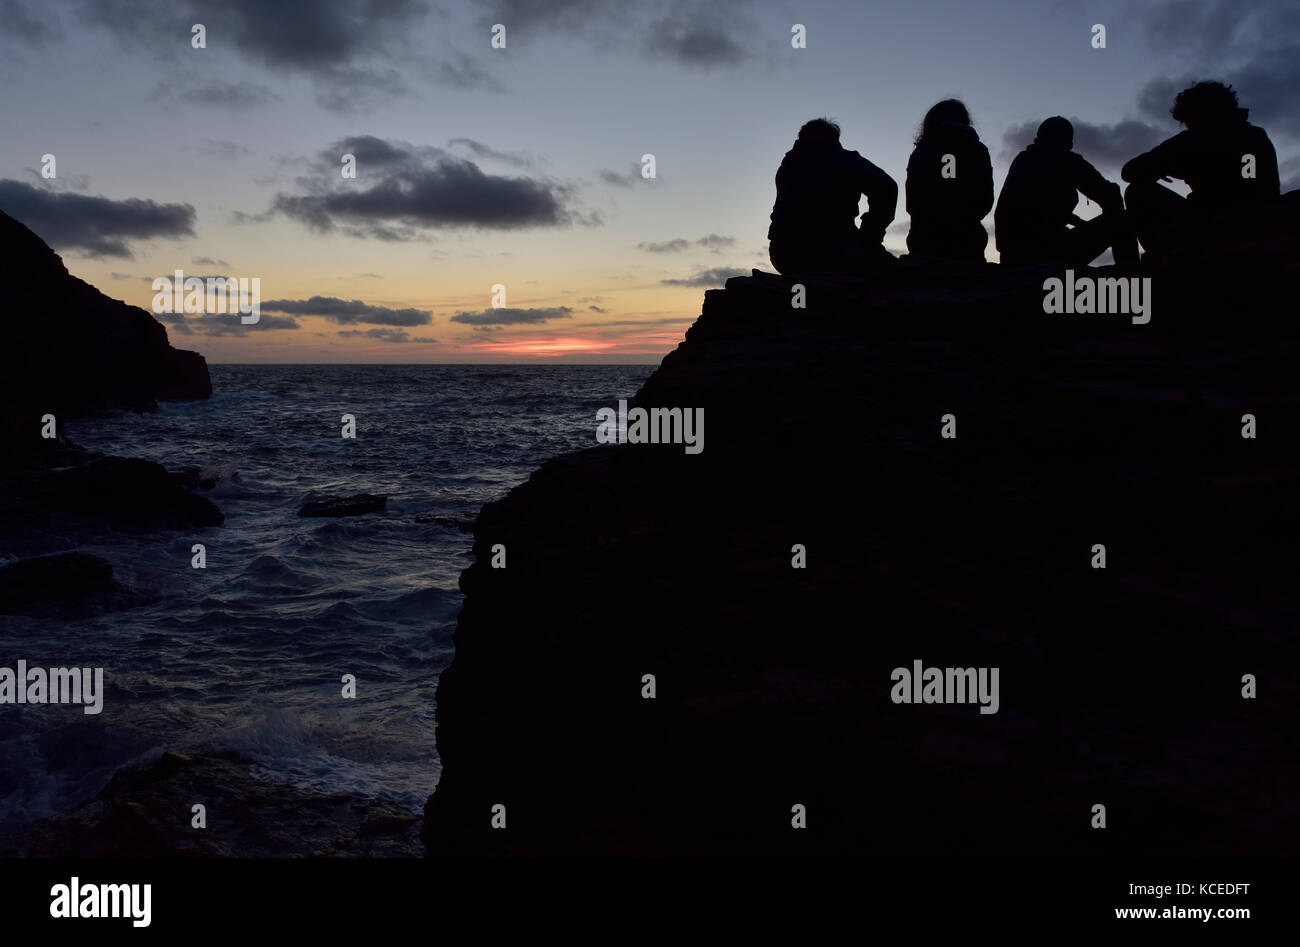 Dusk at Droskyn Point, Perranporth, Cornwall, with four people silhouetted in the dusk. Stock Photo